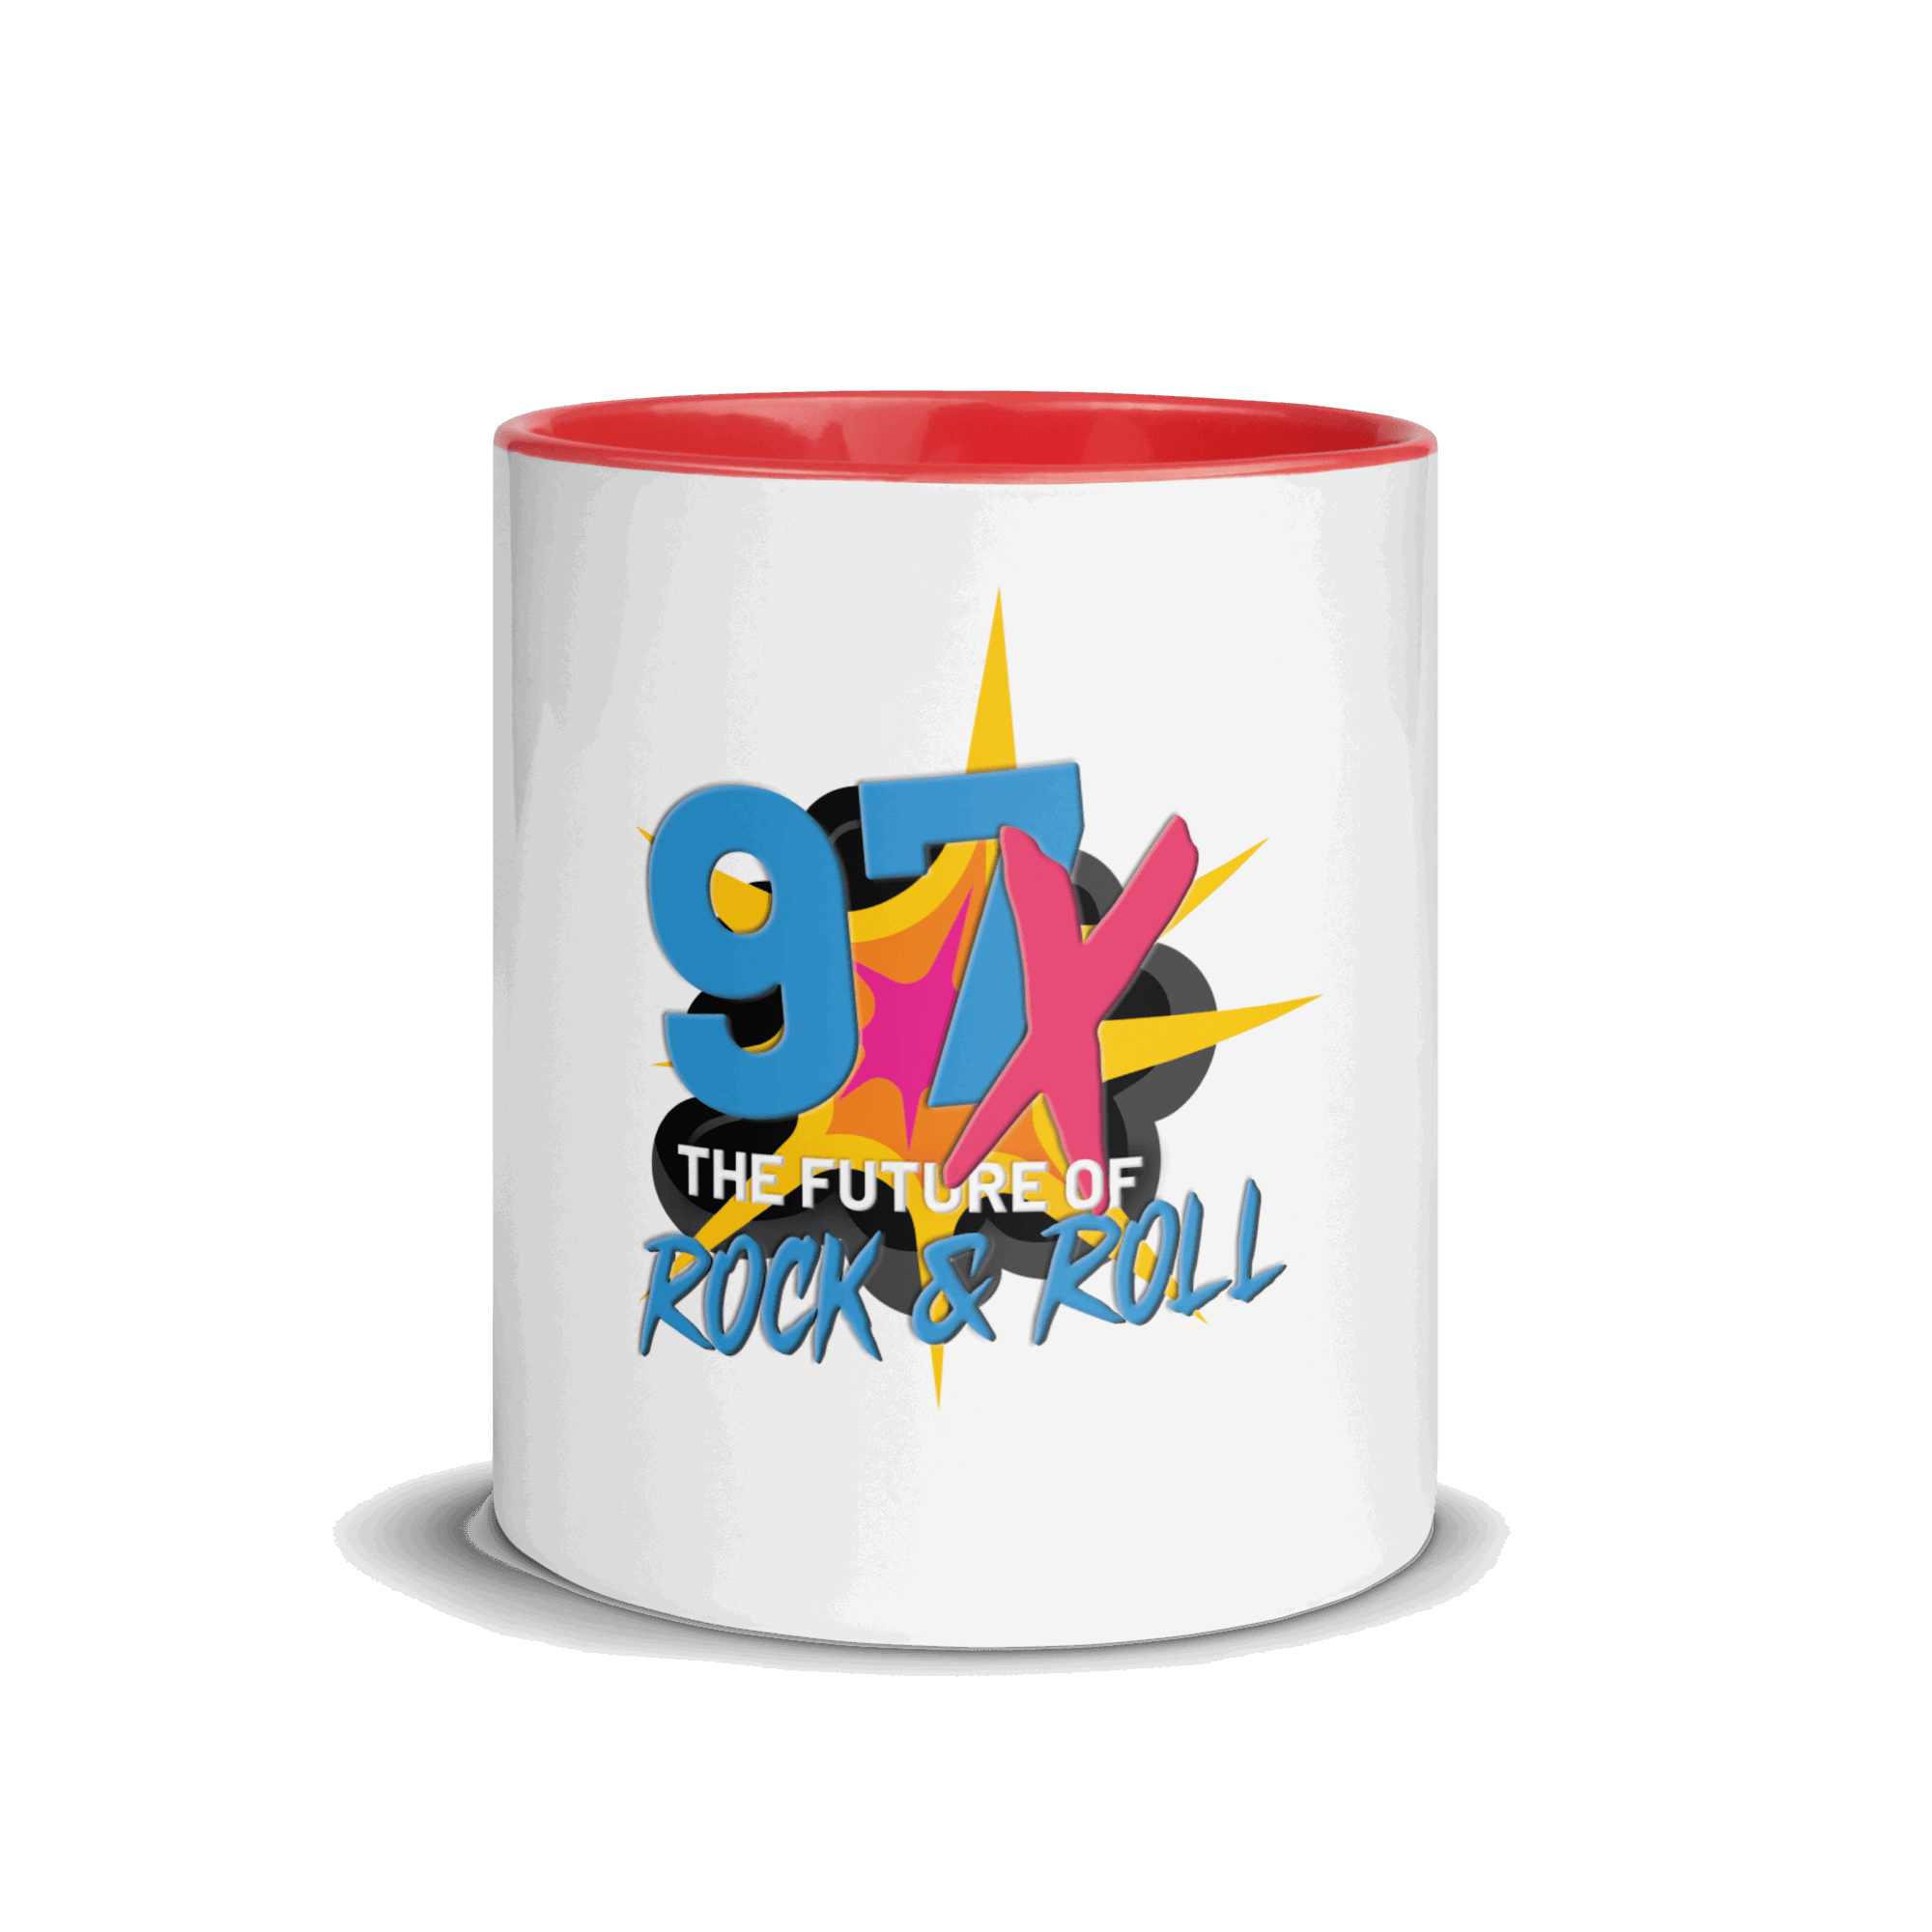 97x The Future Of Rock n Roll Mug with Color Inside